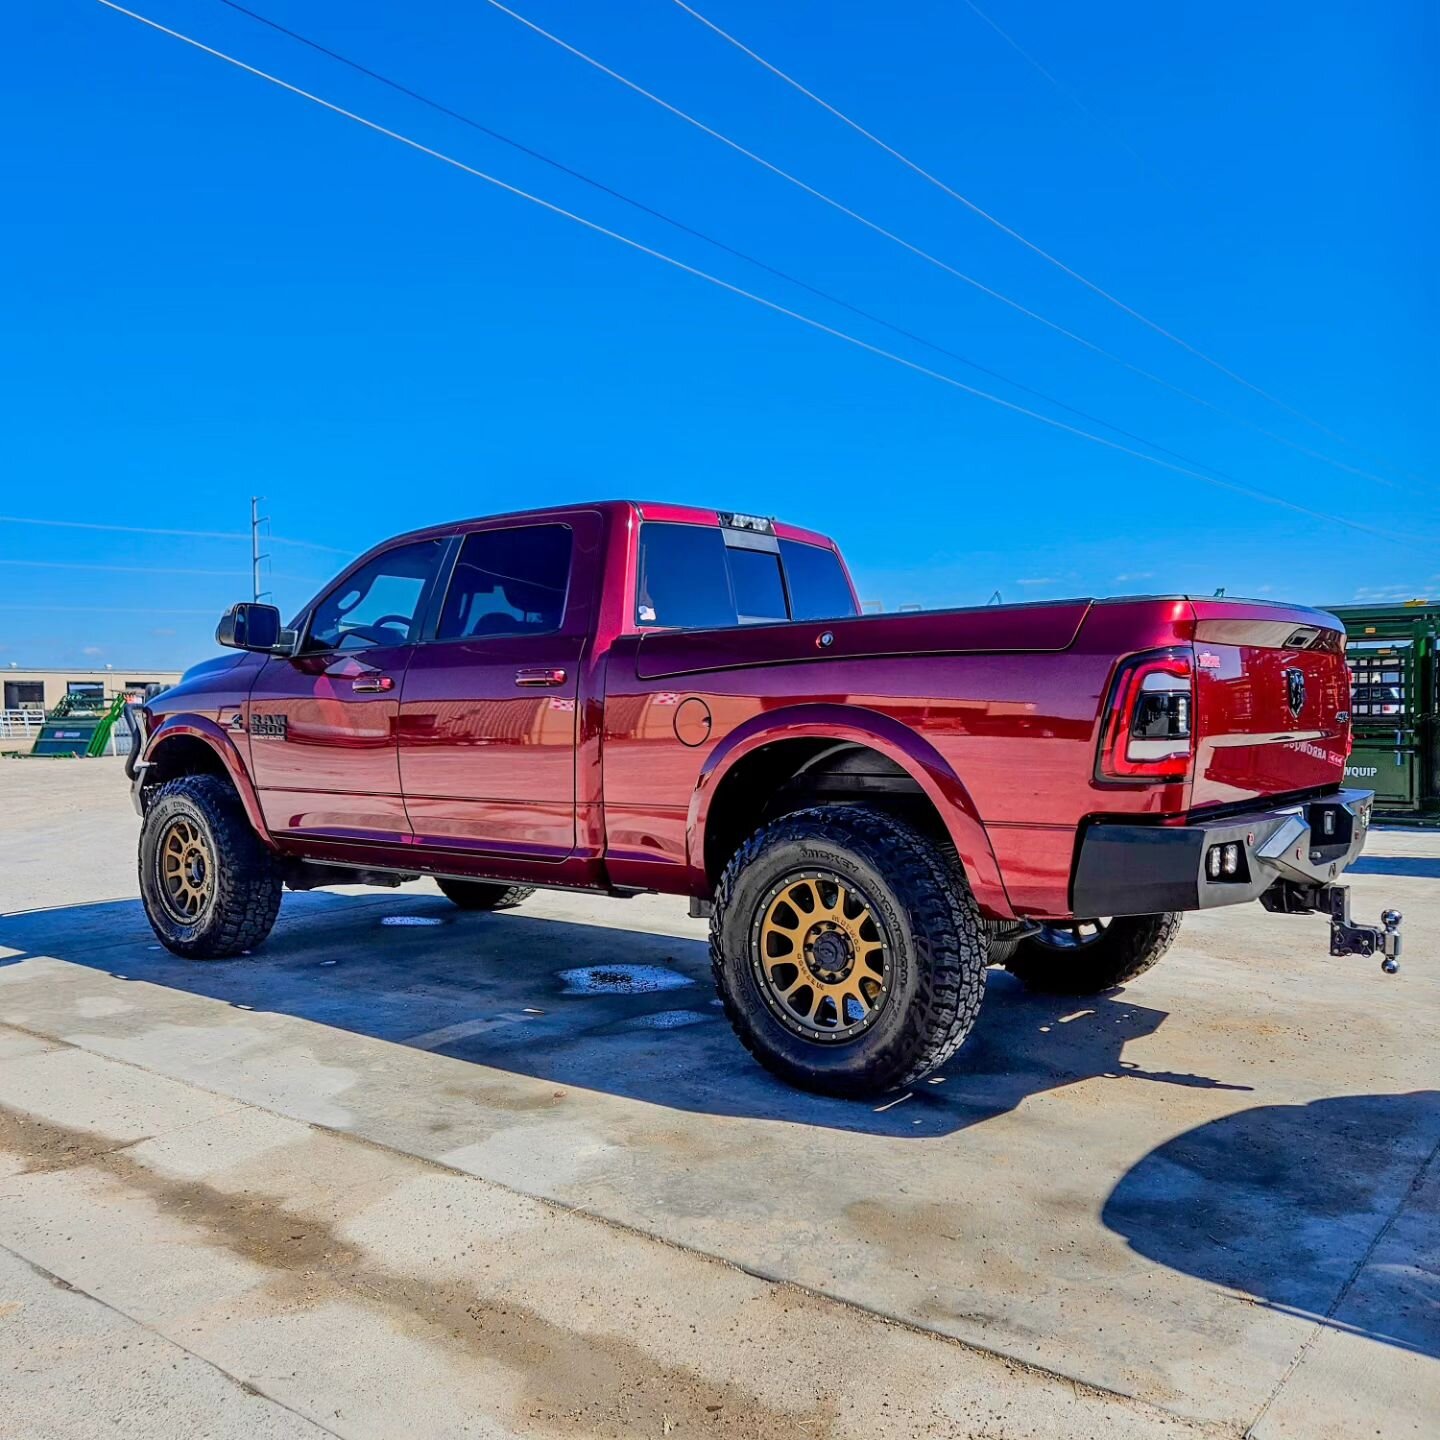 Express Detail on 2020 Ram 2500 HD Cummins Custom!

Thank you Greg for allowing us to maintain your big red truck!

If you would like to know the price and what is included, press the link below

https://www.rgvautopro.com/express-detailing

We come 